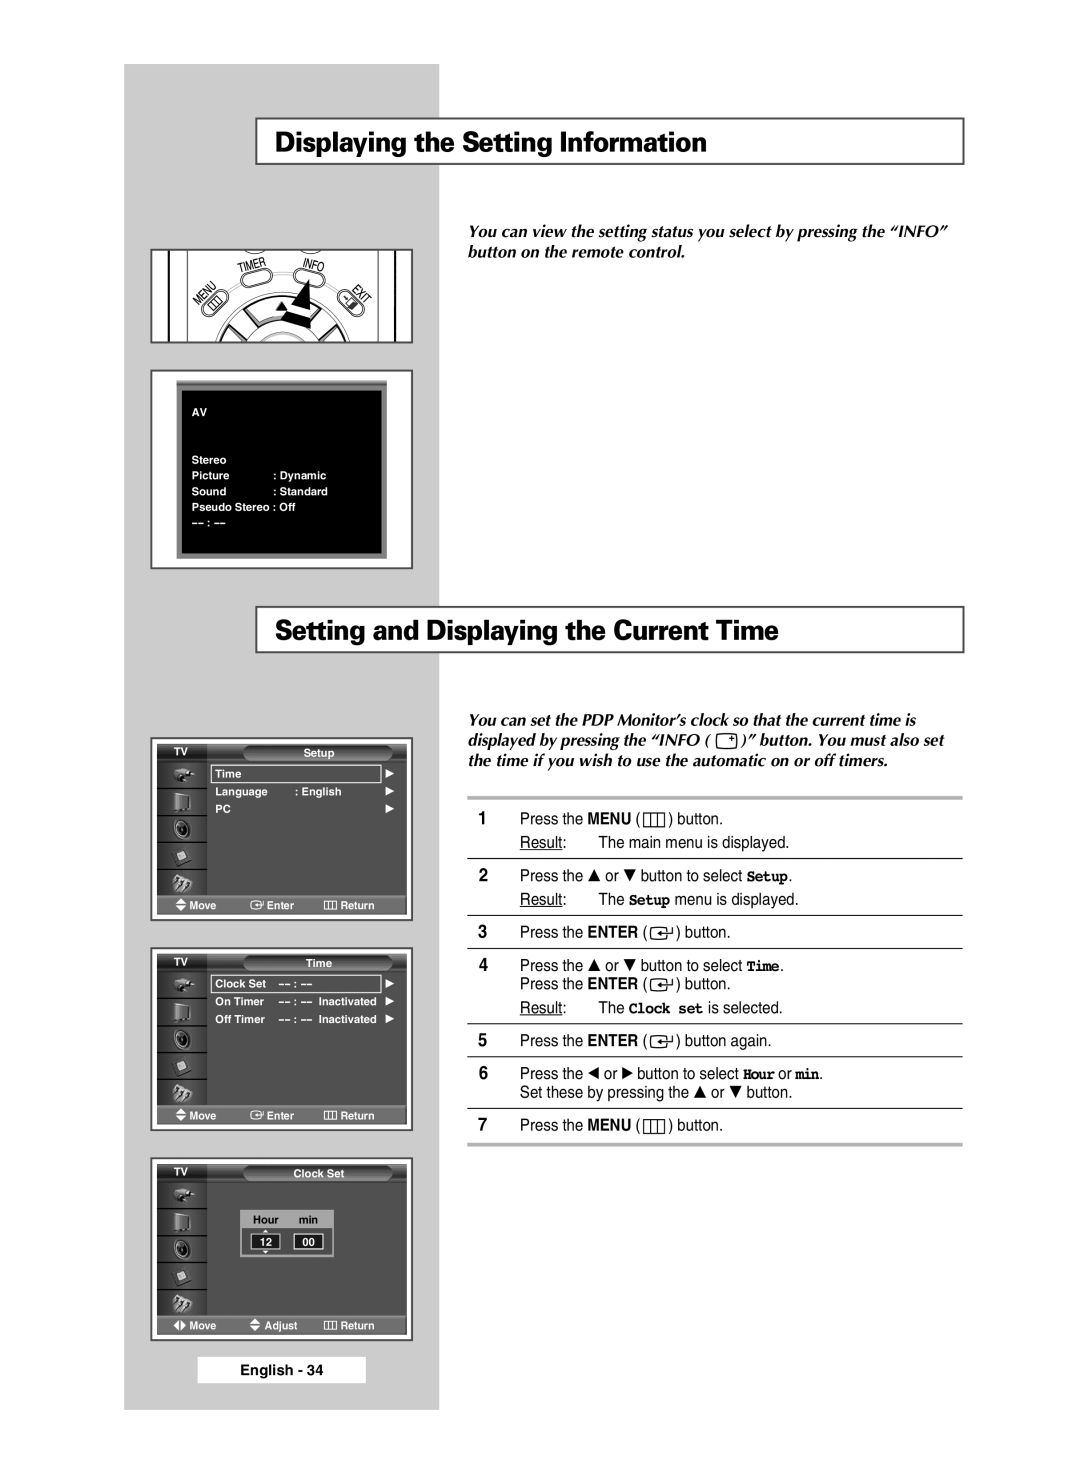 Samsung PPM50M5HSX/EDC, PPM42M5SSX/EDC manual Displaying the Setting Information, Setting and Displaying the Current Time 